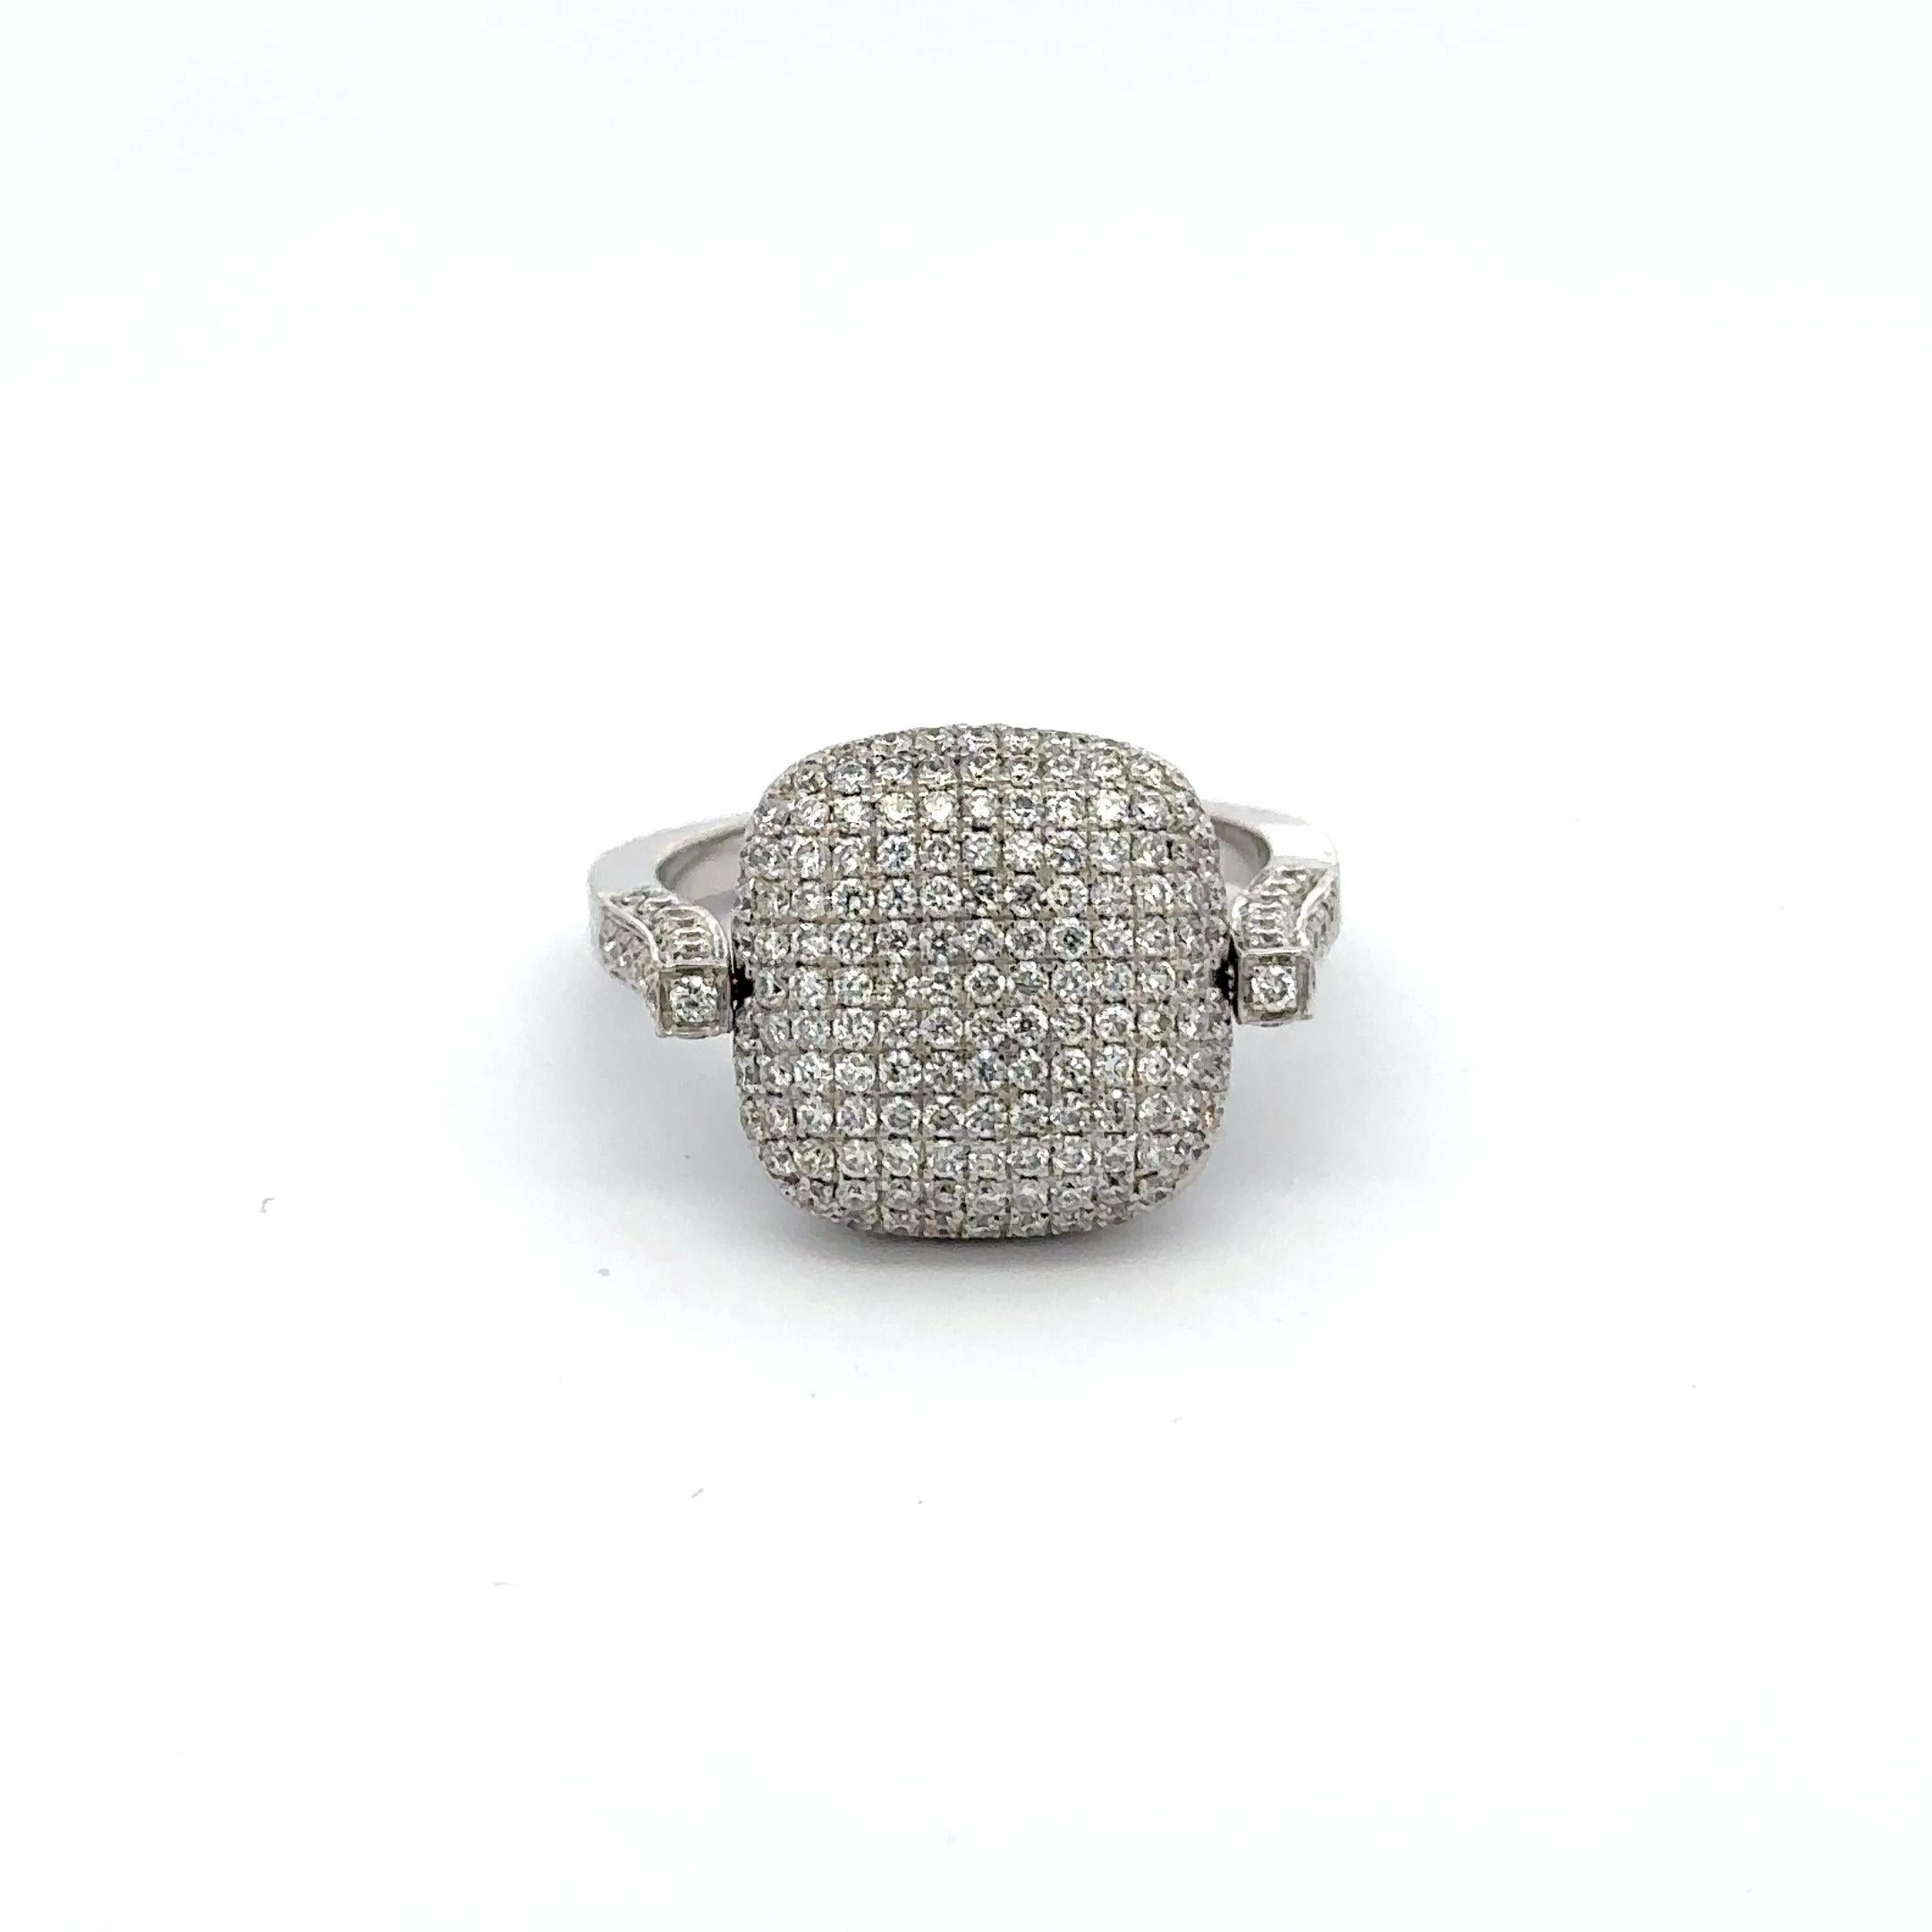 For Sale:  Unique Diamond Flip Ring in 18k Solid White Gold, Fine Jewelry for Him  2